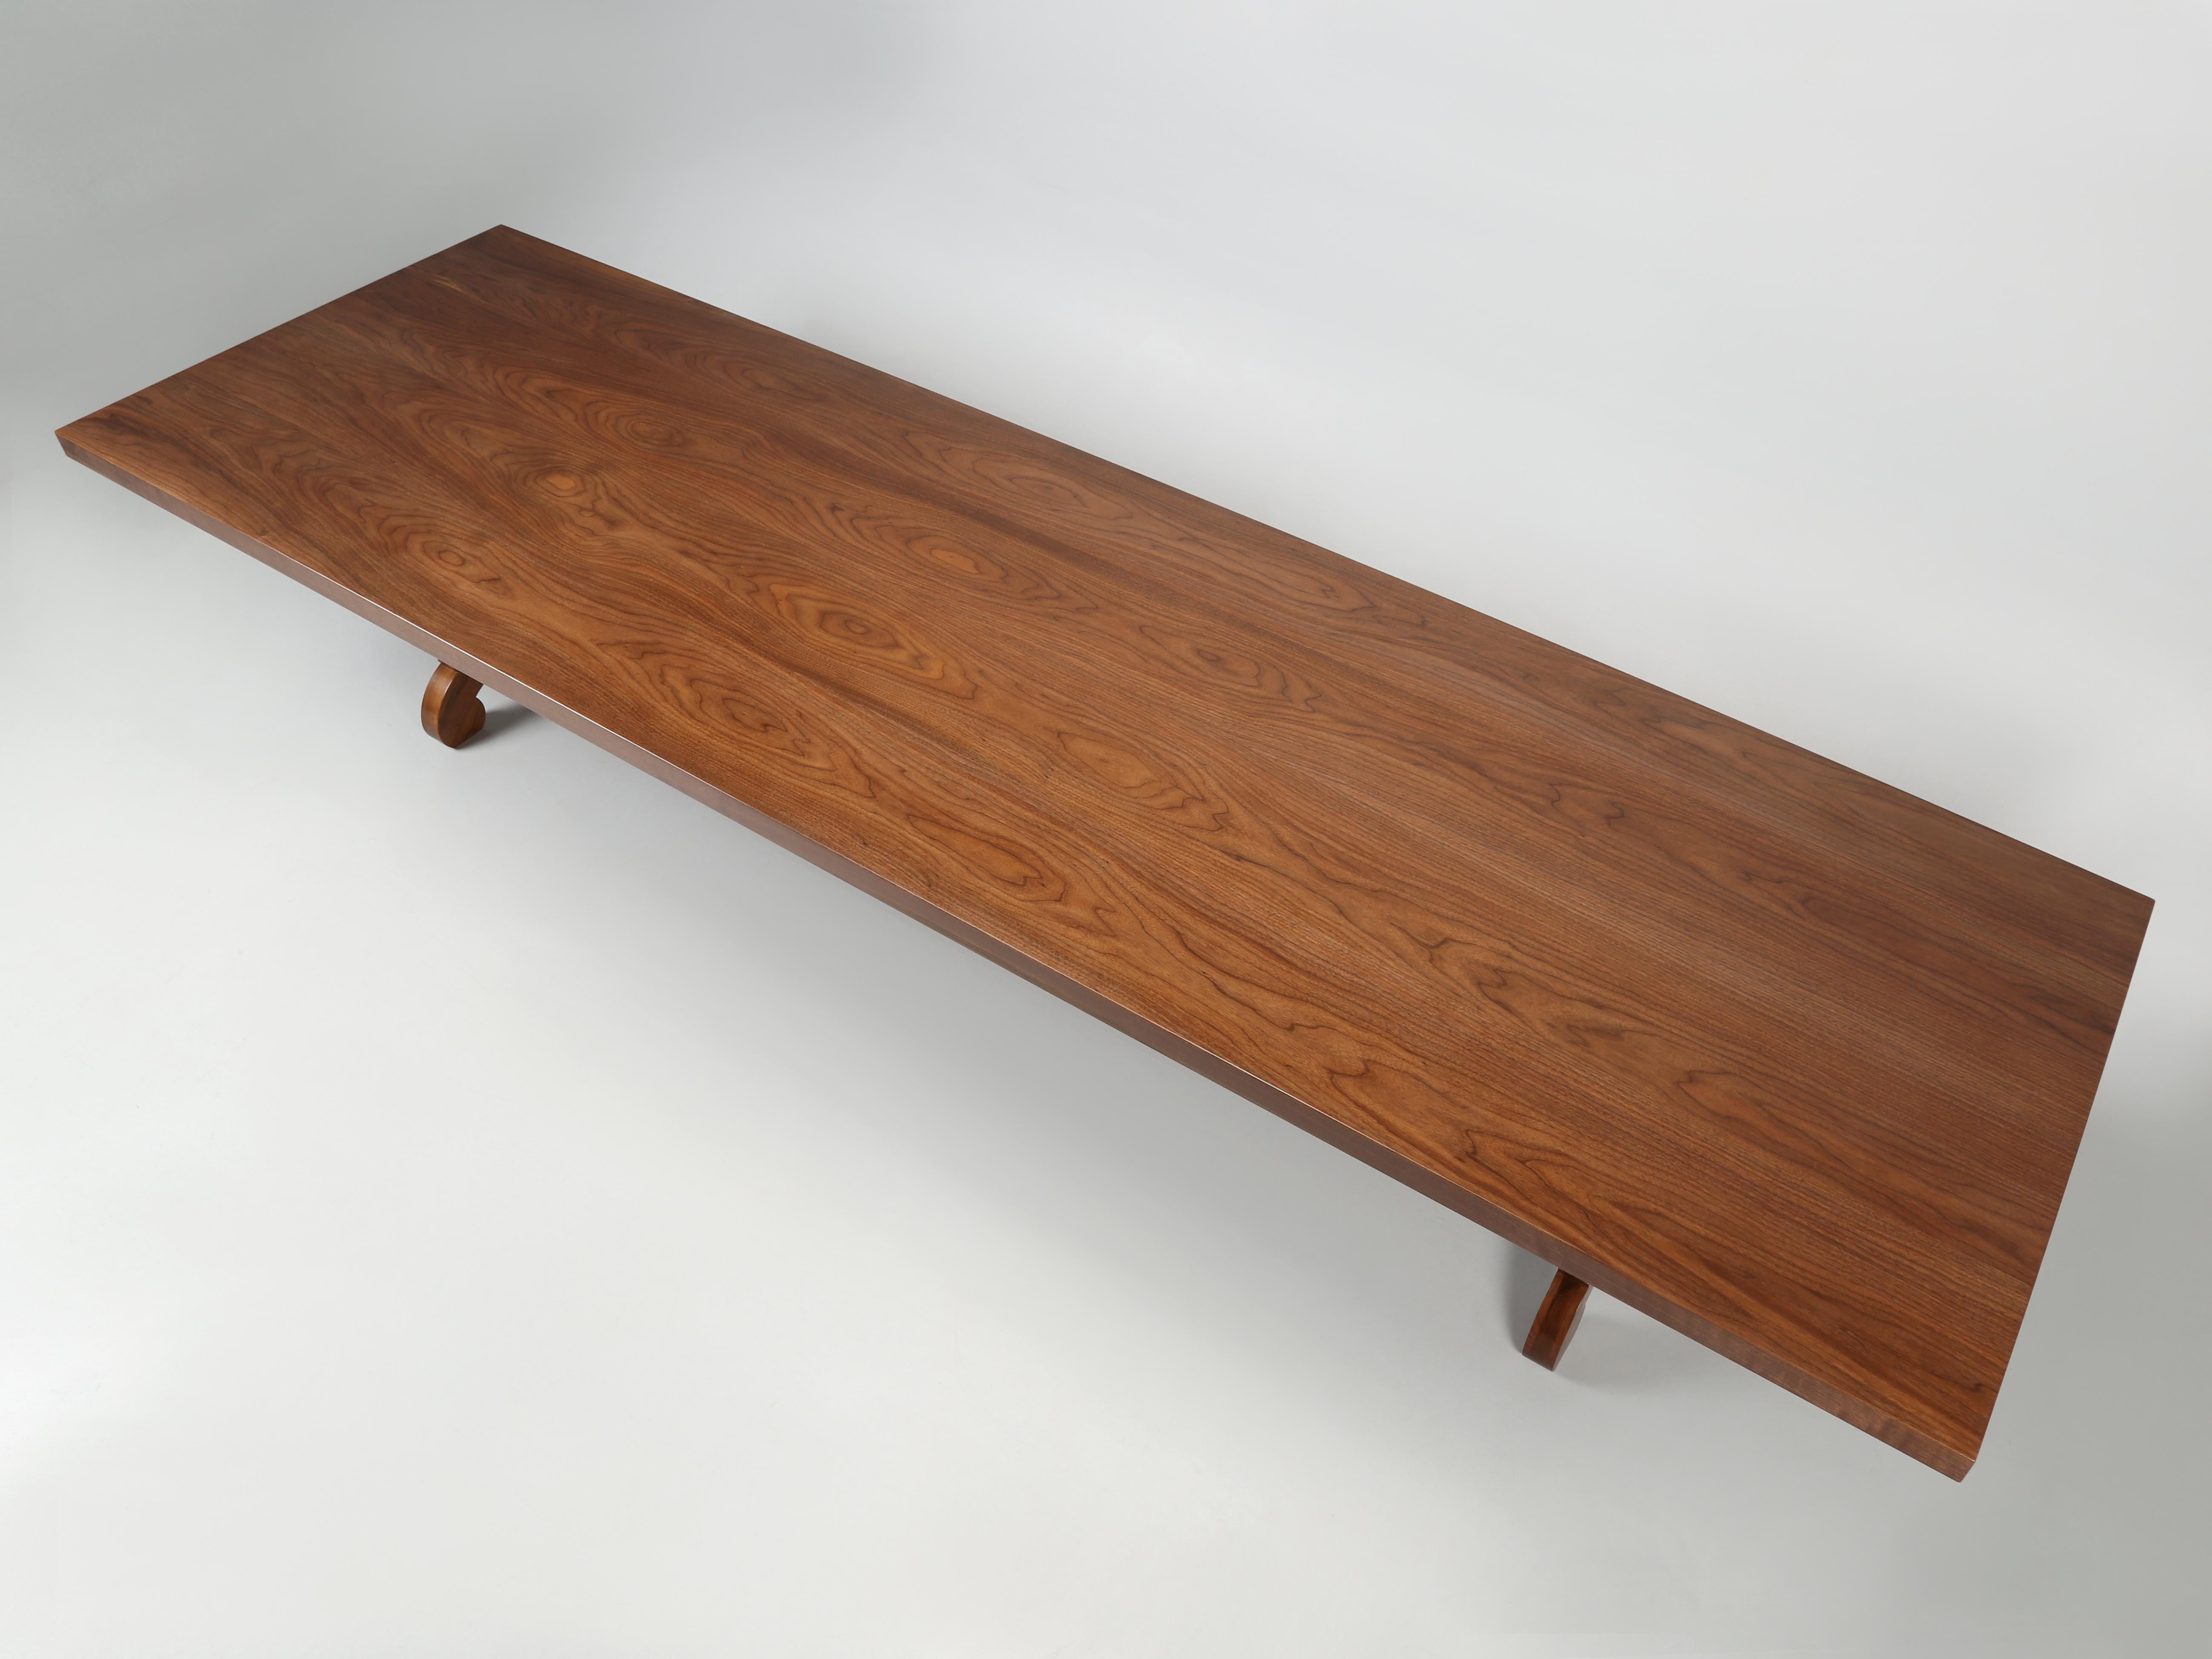 Hand-Carved Spectacular Walnut Dining Table Made in Chicago by Old Plank to Order For Sale